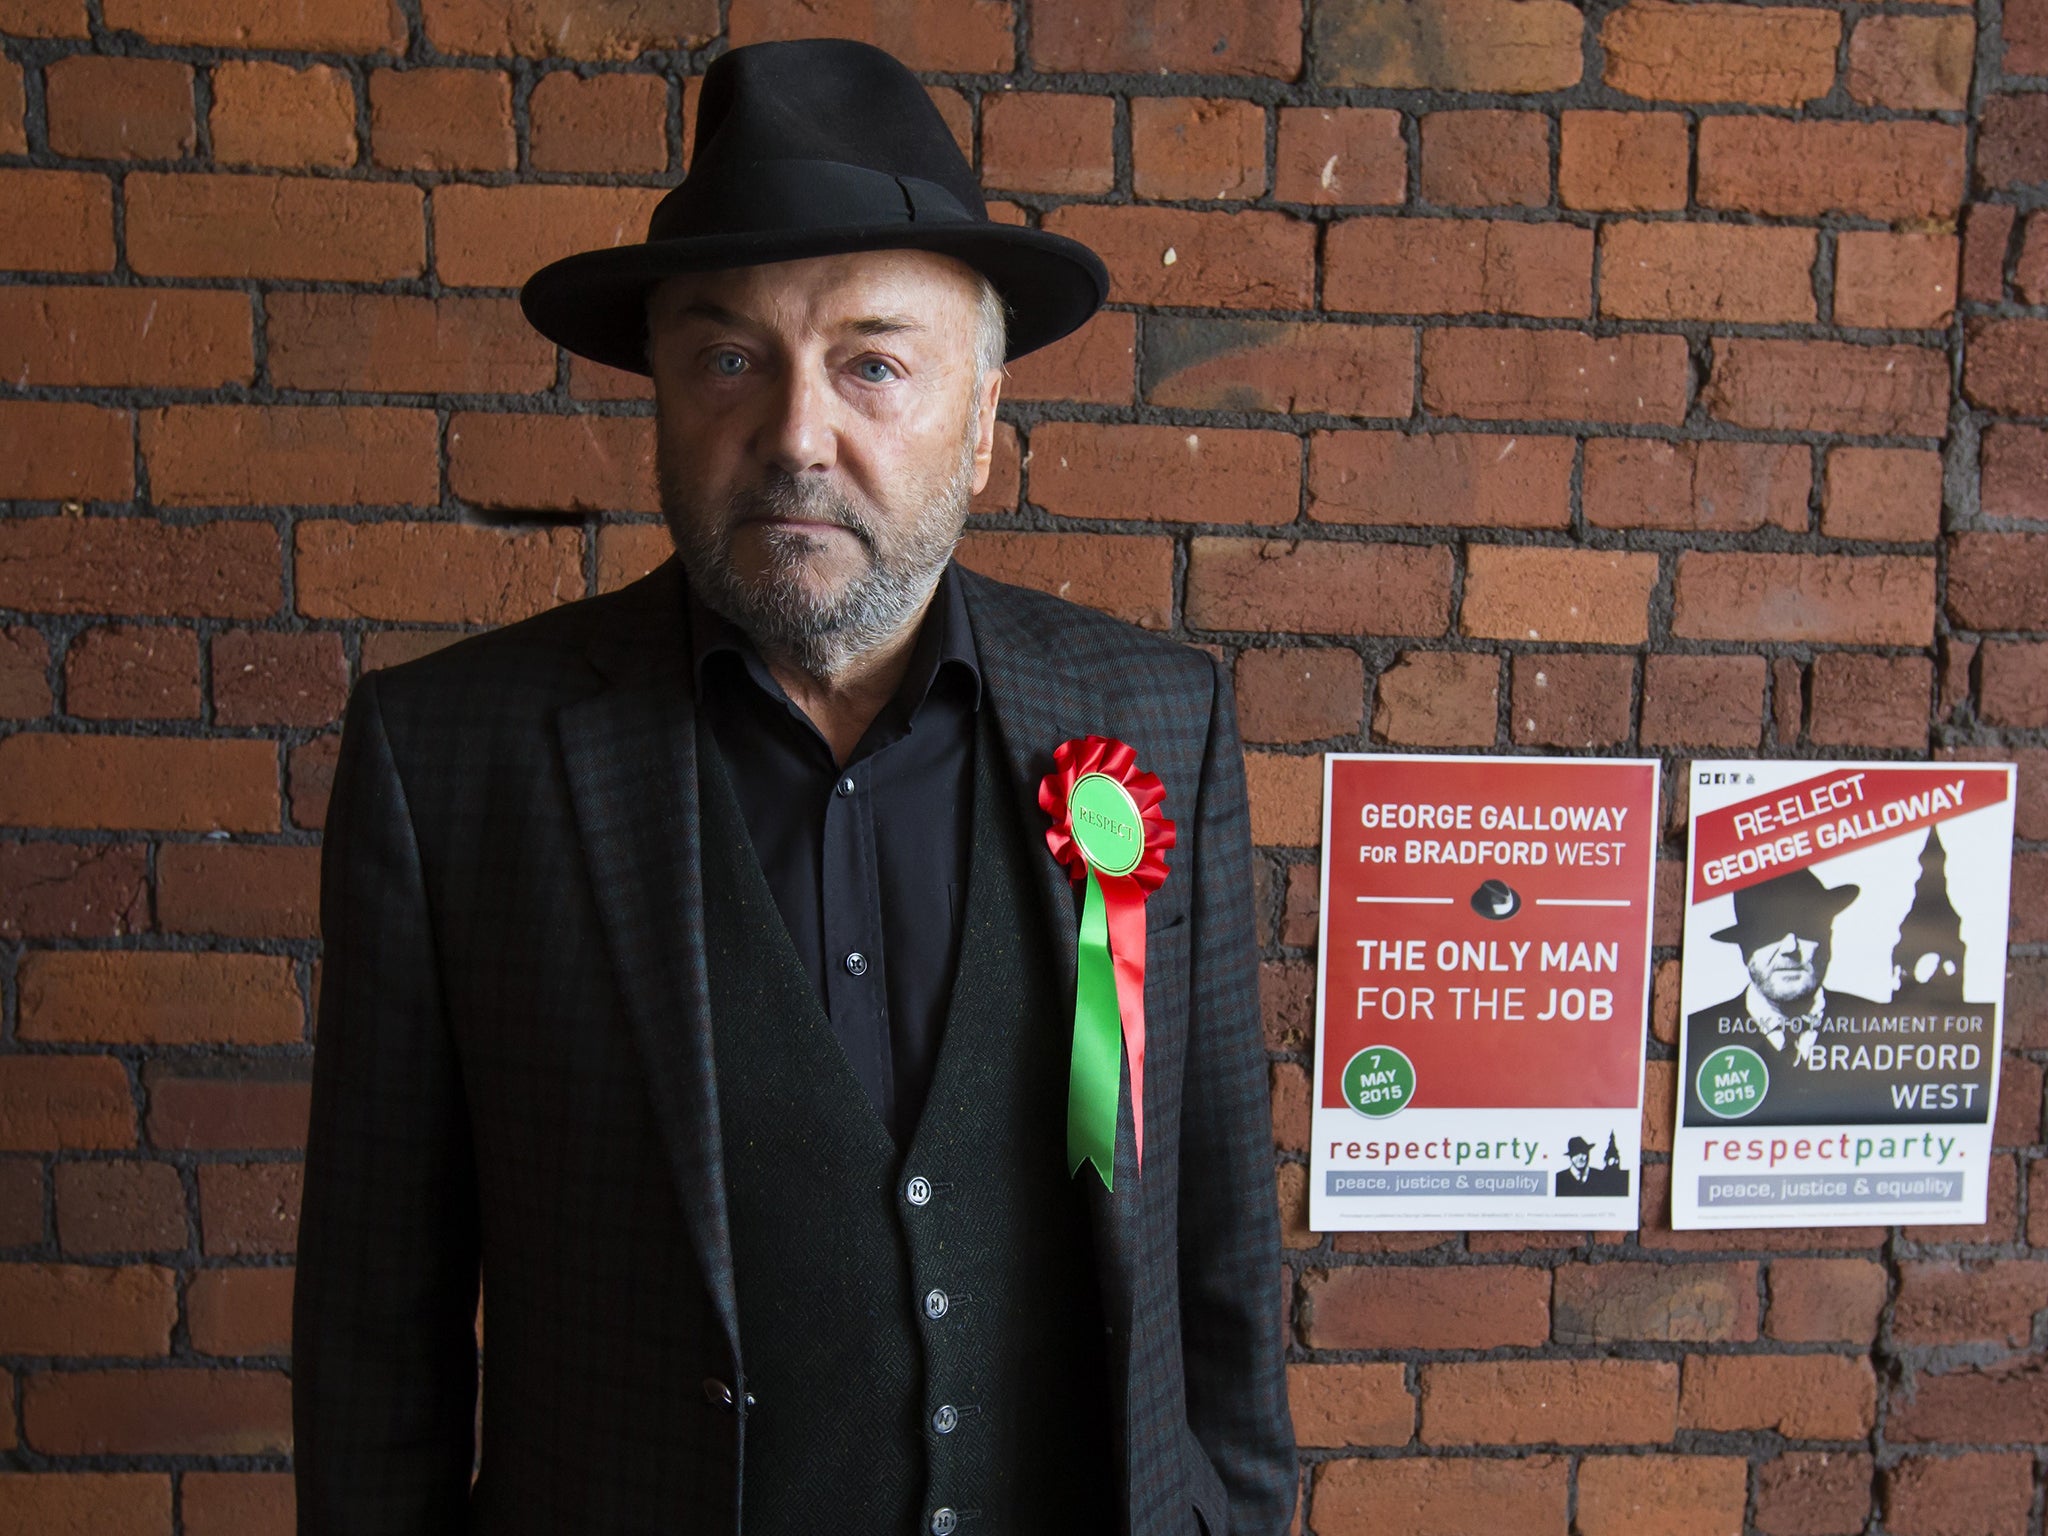 Respect Party Leader George Galloway made repeated personal attacks on his Labour opponent Naz Shah during this campaign